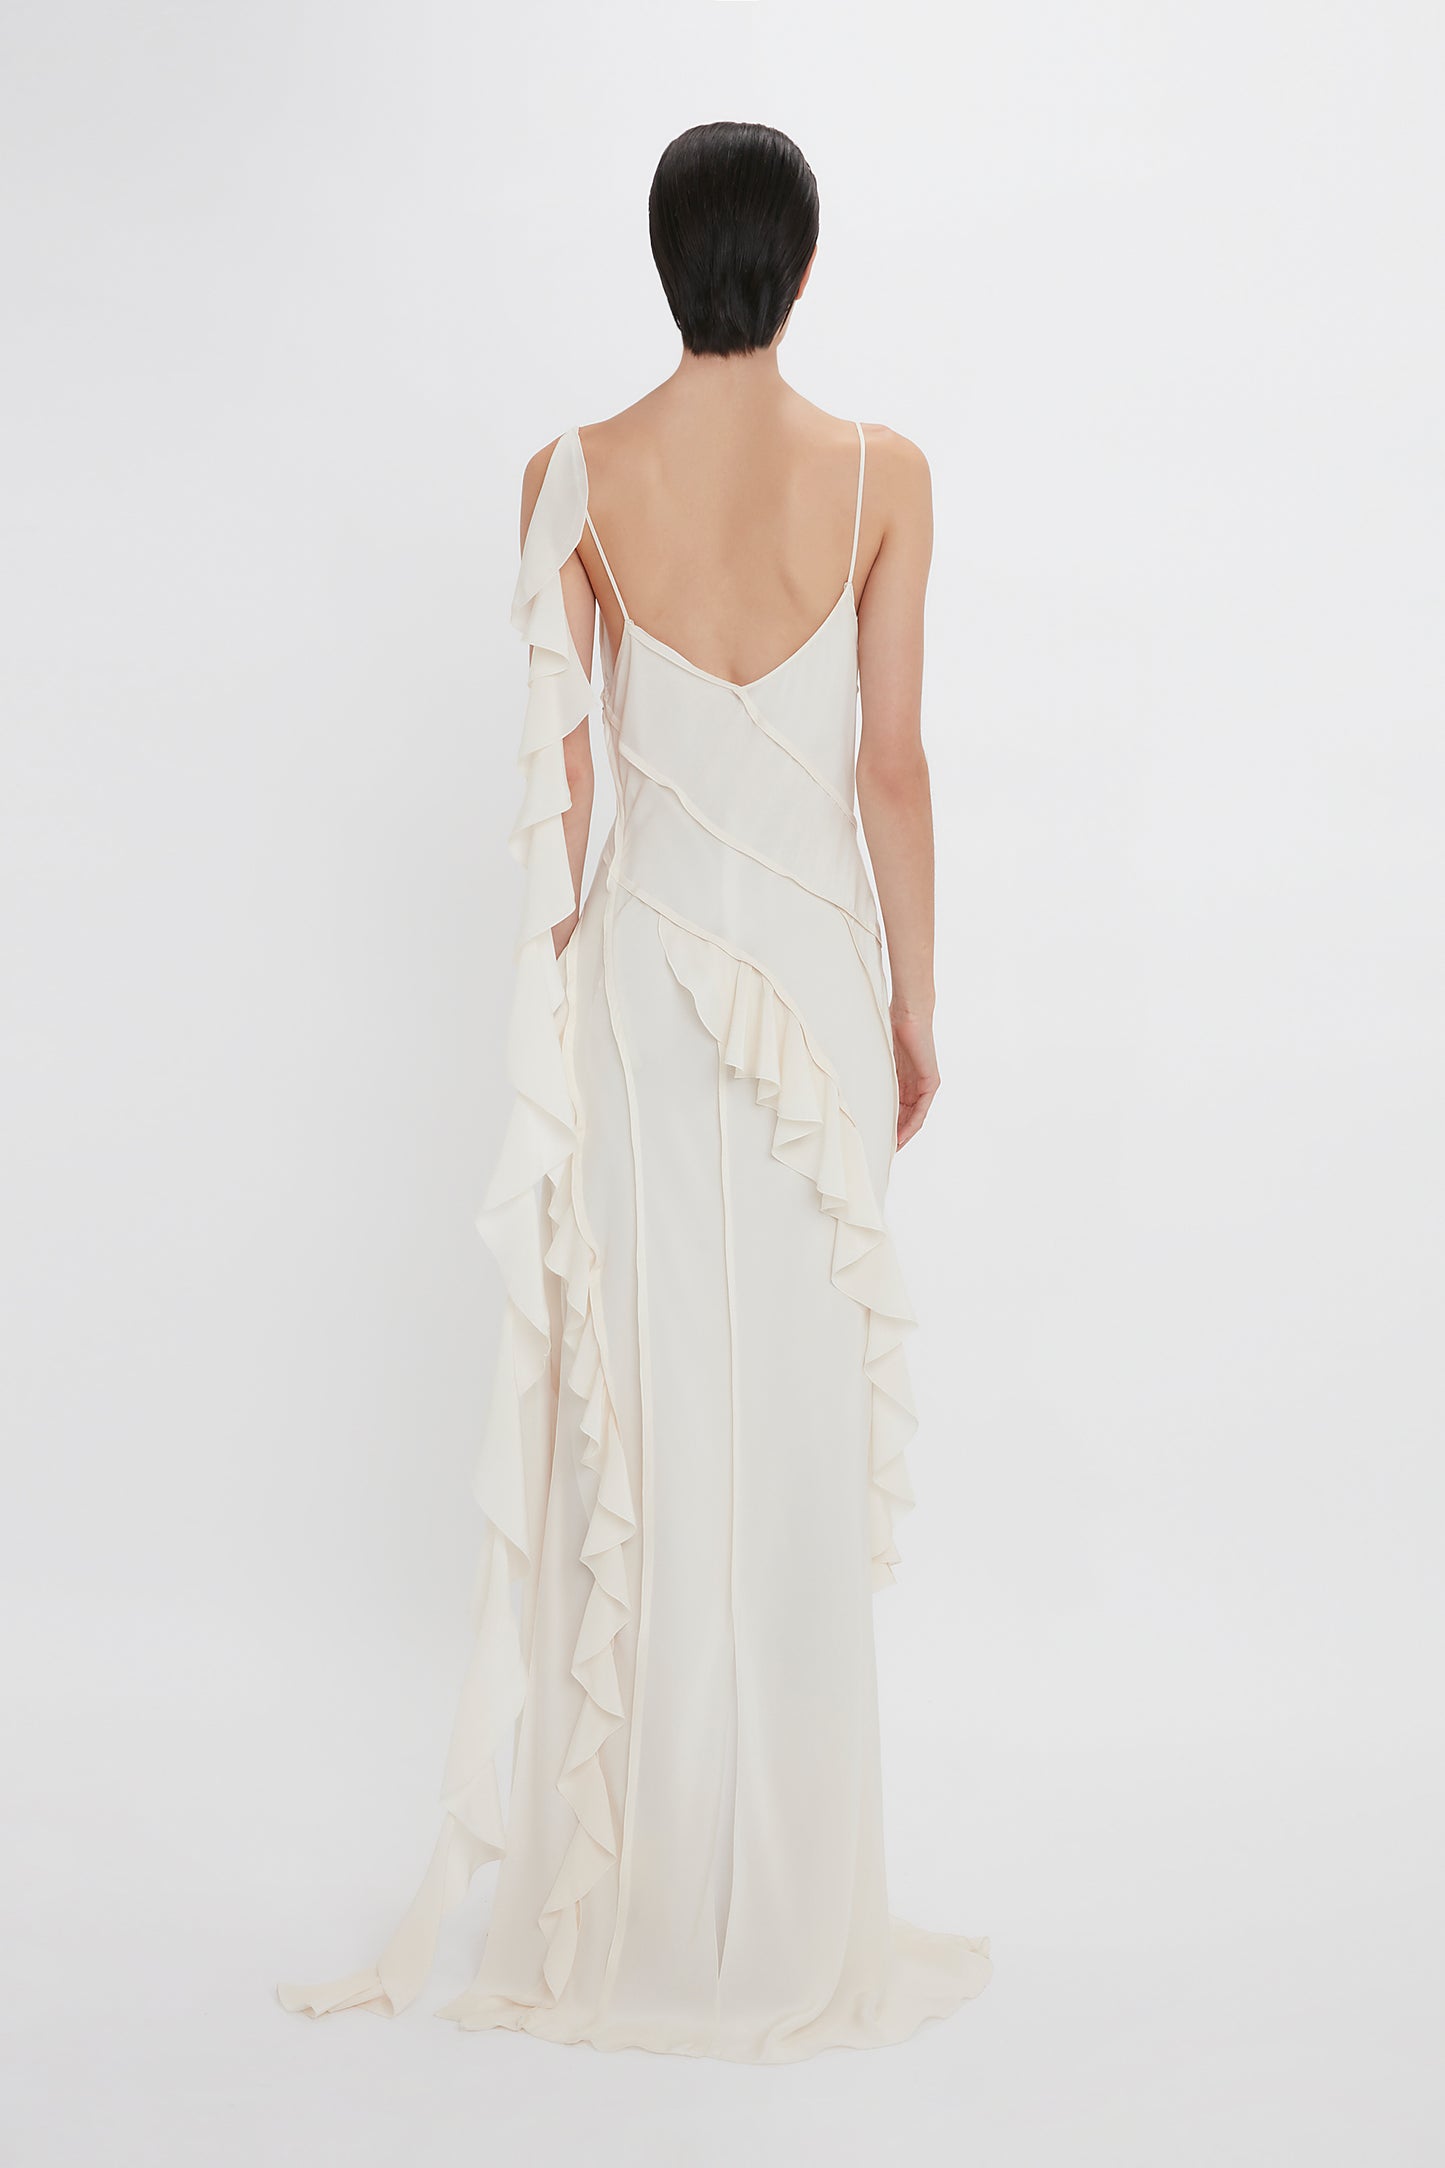 Woman in an elegant Victoria Beckham Exclusive Asymmetric Bias Frill Dress In Ivory with ruffled detailing, viewed from behind against a plain background.